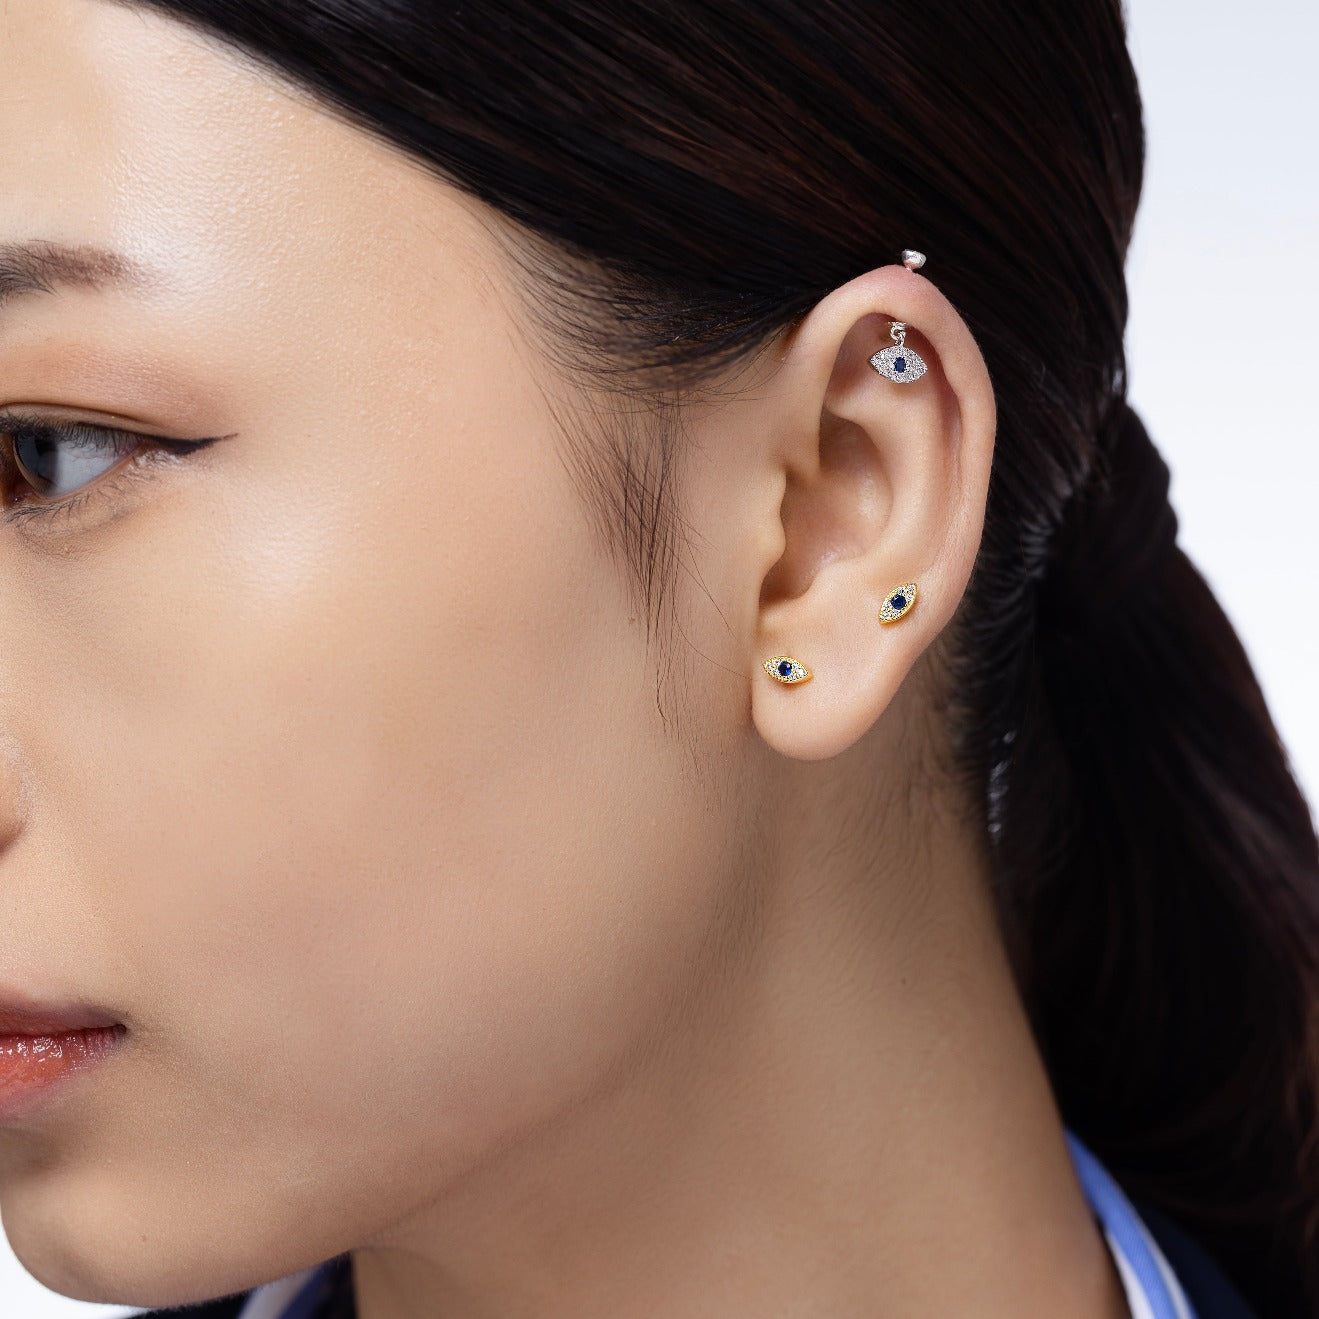 How to Select the Right Jewelry for Your Helix Piercing |  UrbanBodyJewelry.com